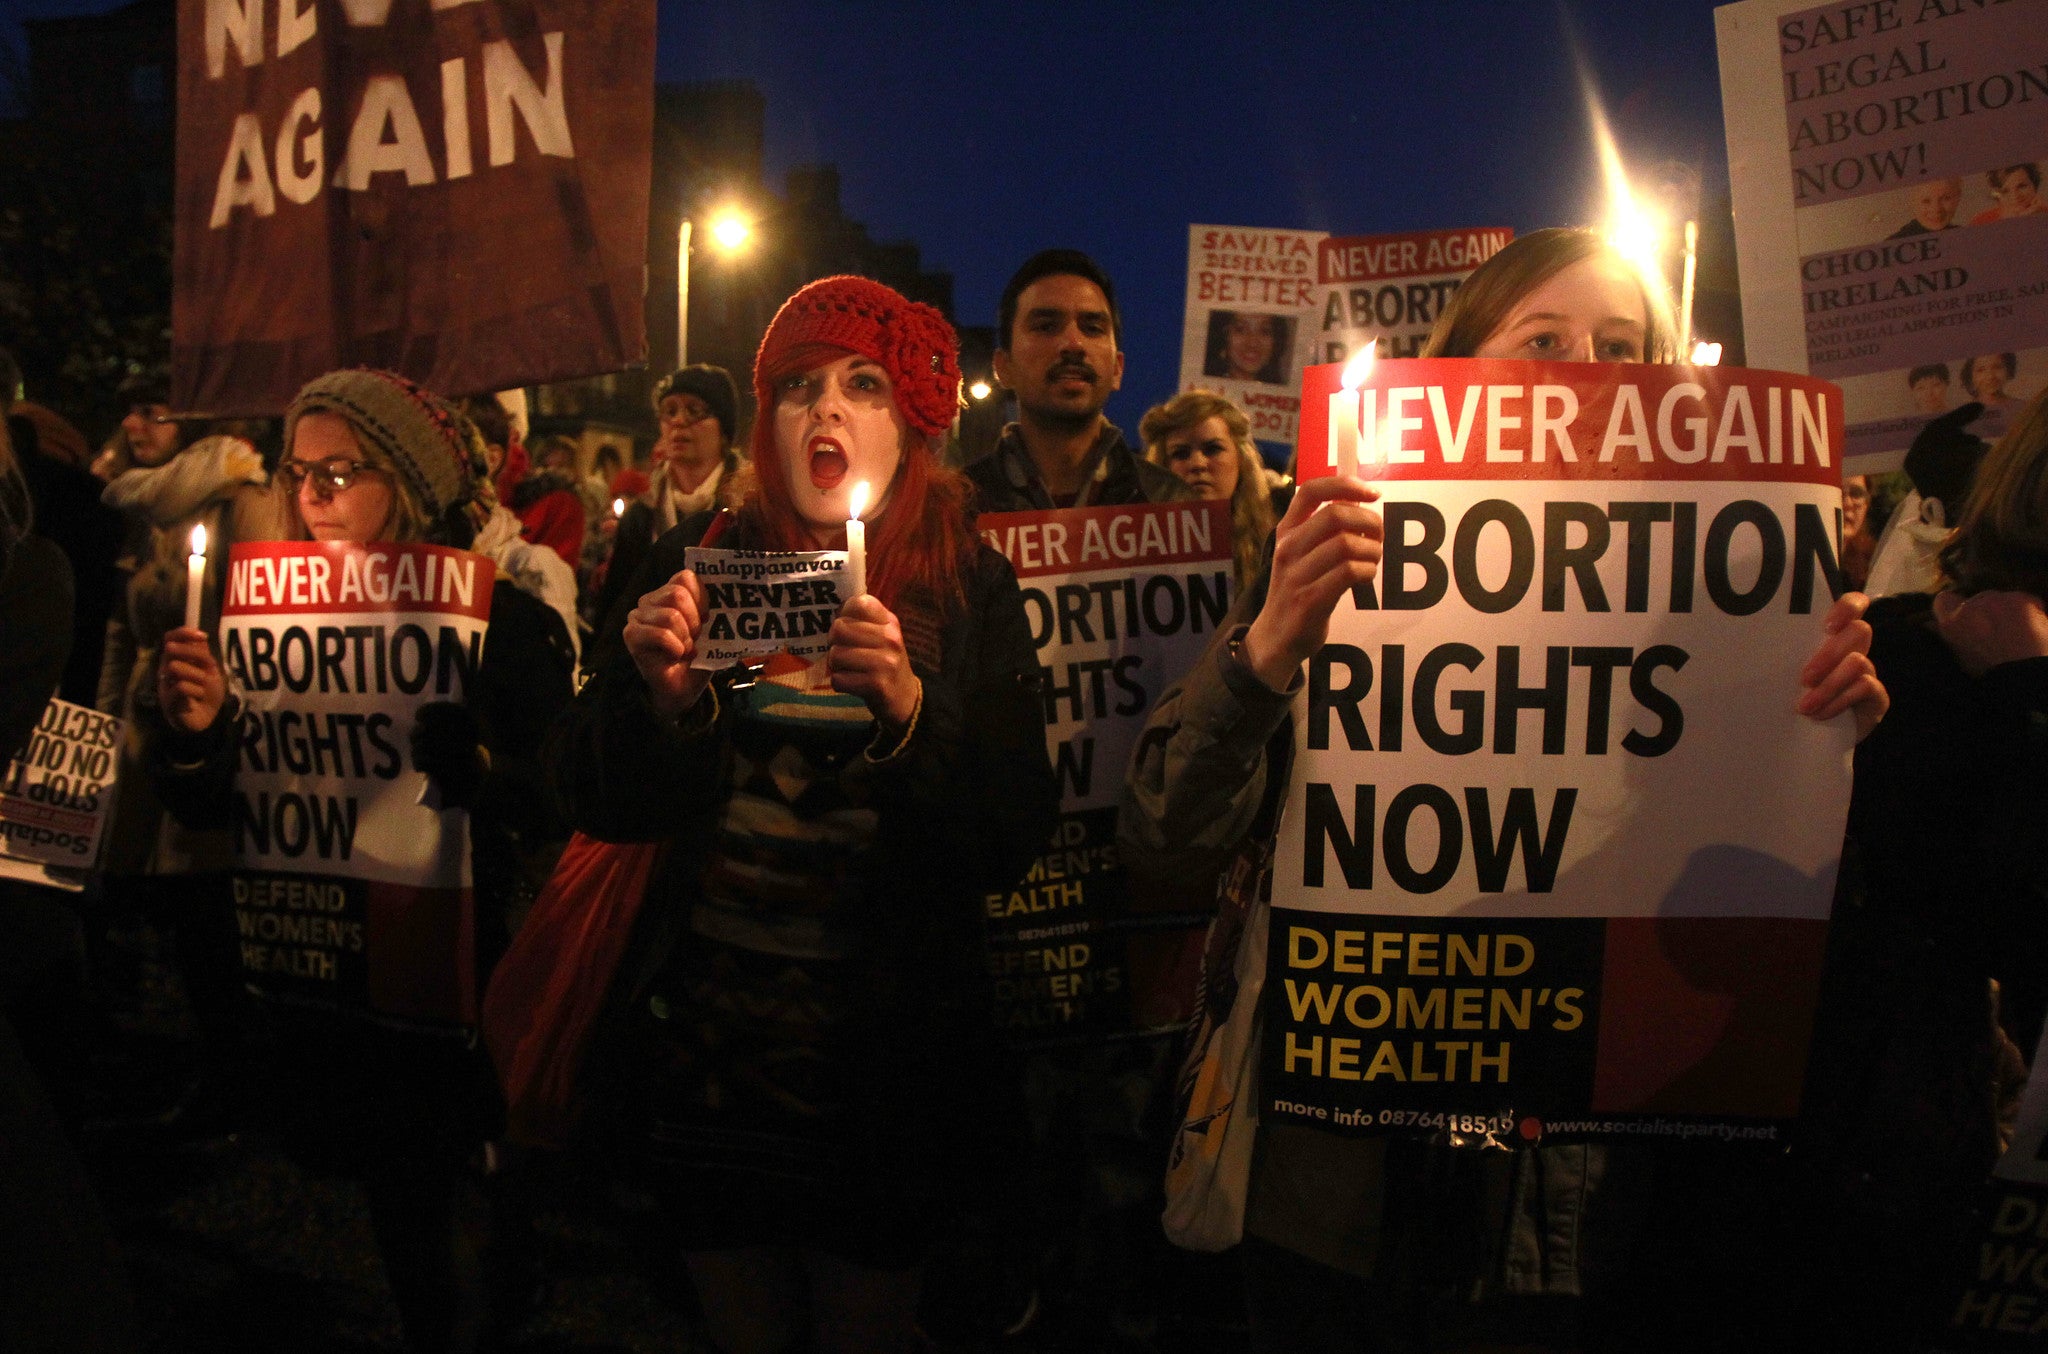 Protesters march towards the Dail in Dublin, in remembrance of Savita Halappanavar, who died after she was denied an abortion in 2012